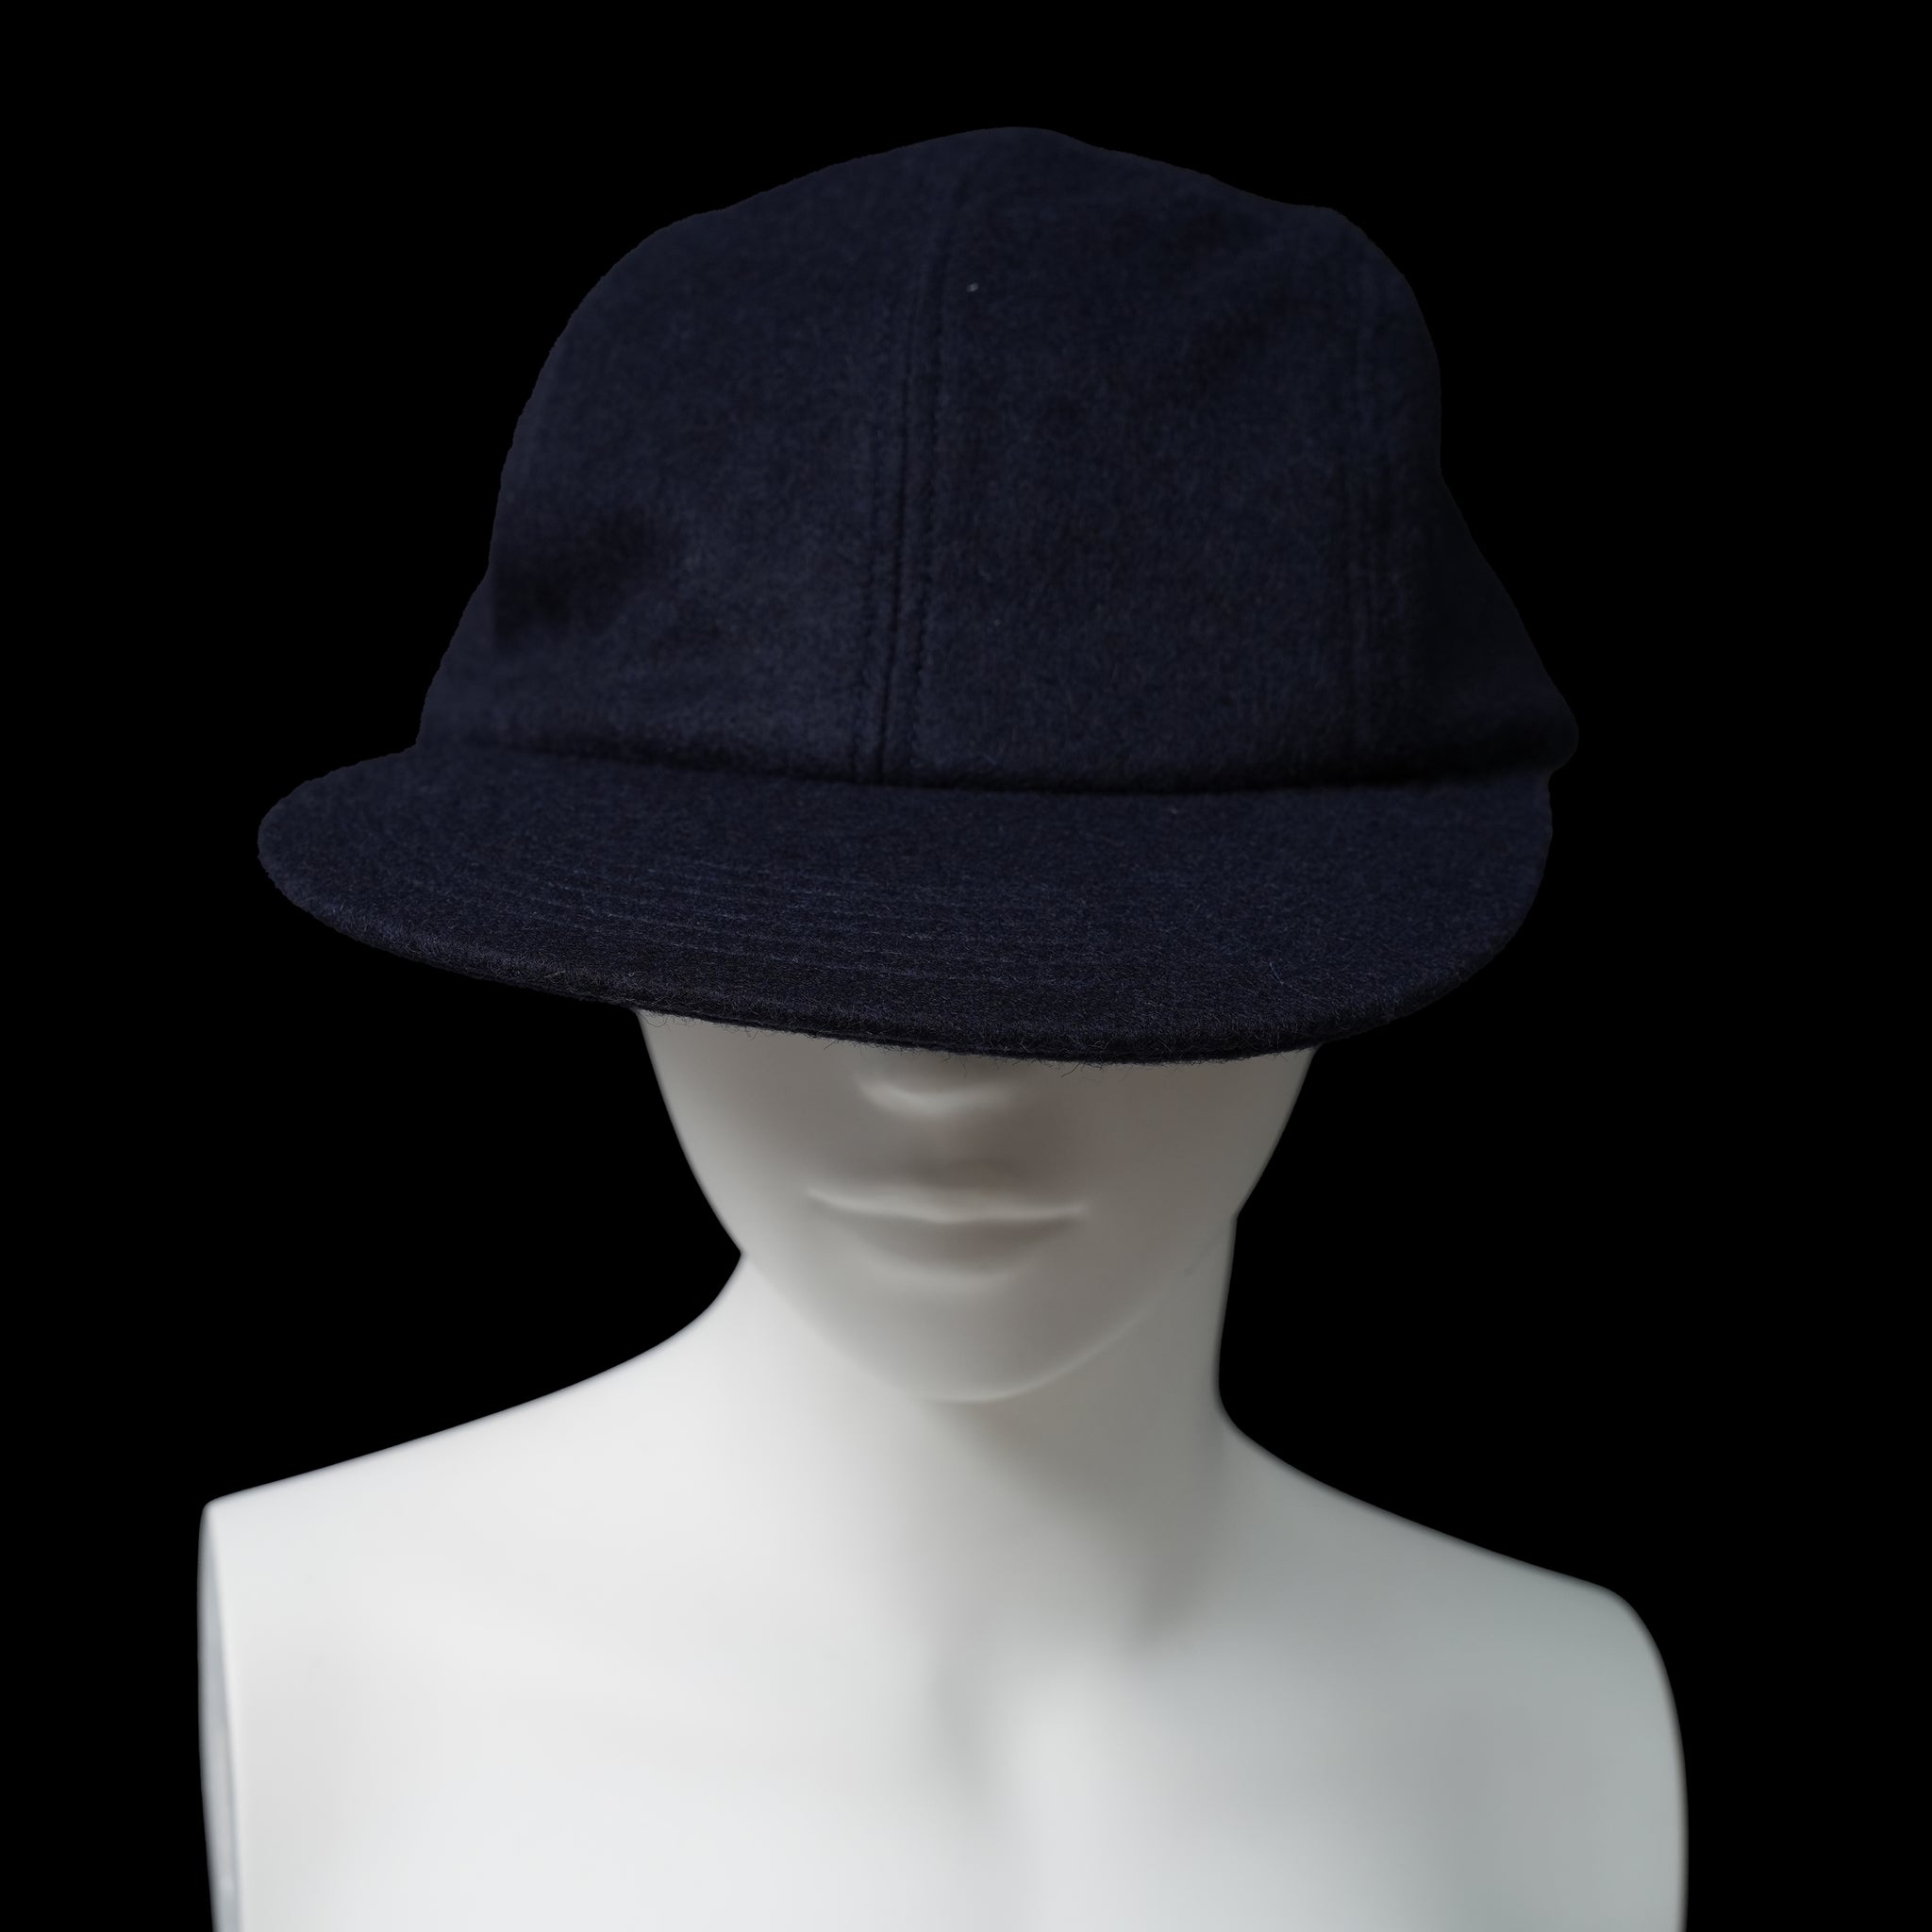 No:UN-022_AW23 | Name:UNTRACE x IDSL EASY TIME 4 PANEL CAP | Color:Dark Navy【UNTRACE_アントレース】